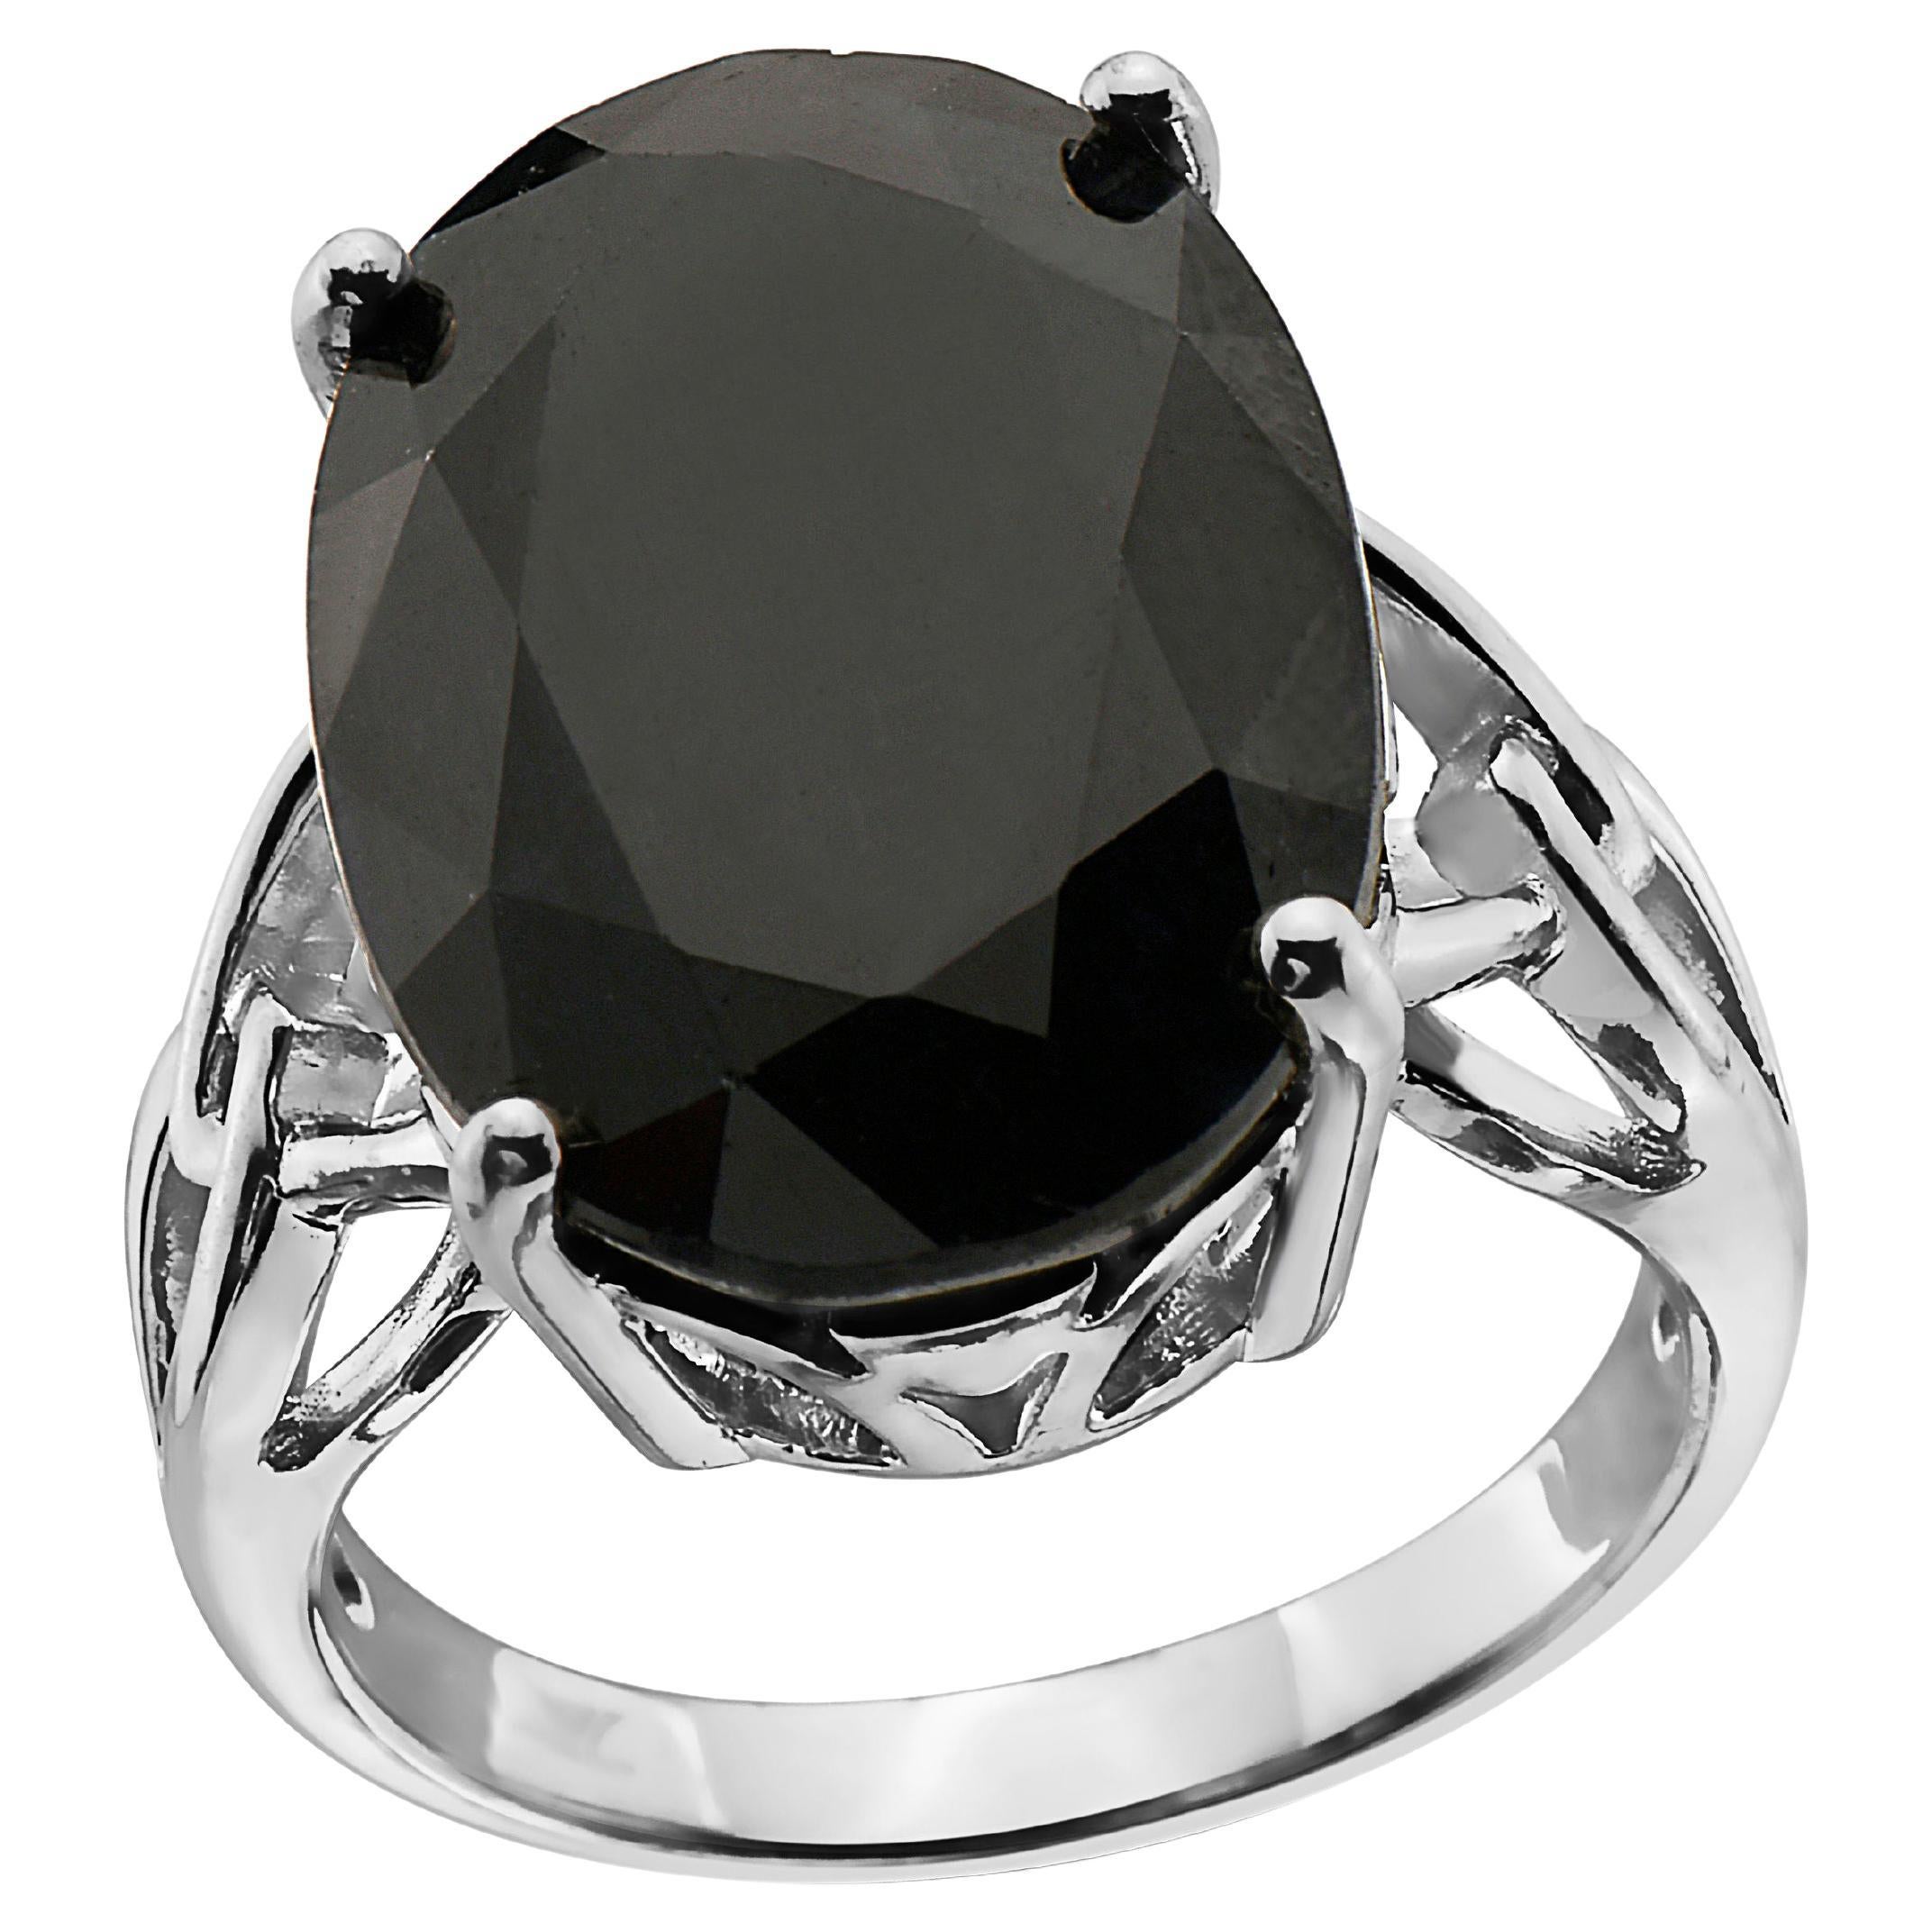 LeVian 925 Sterling Silver Black Sapphire Gemstone Cocktail Solitaire Ring